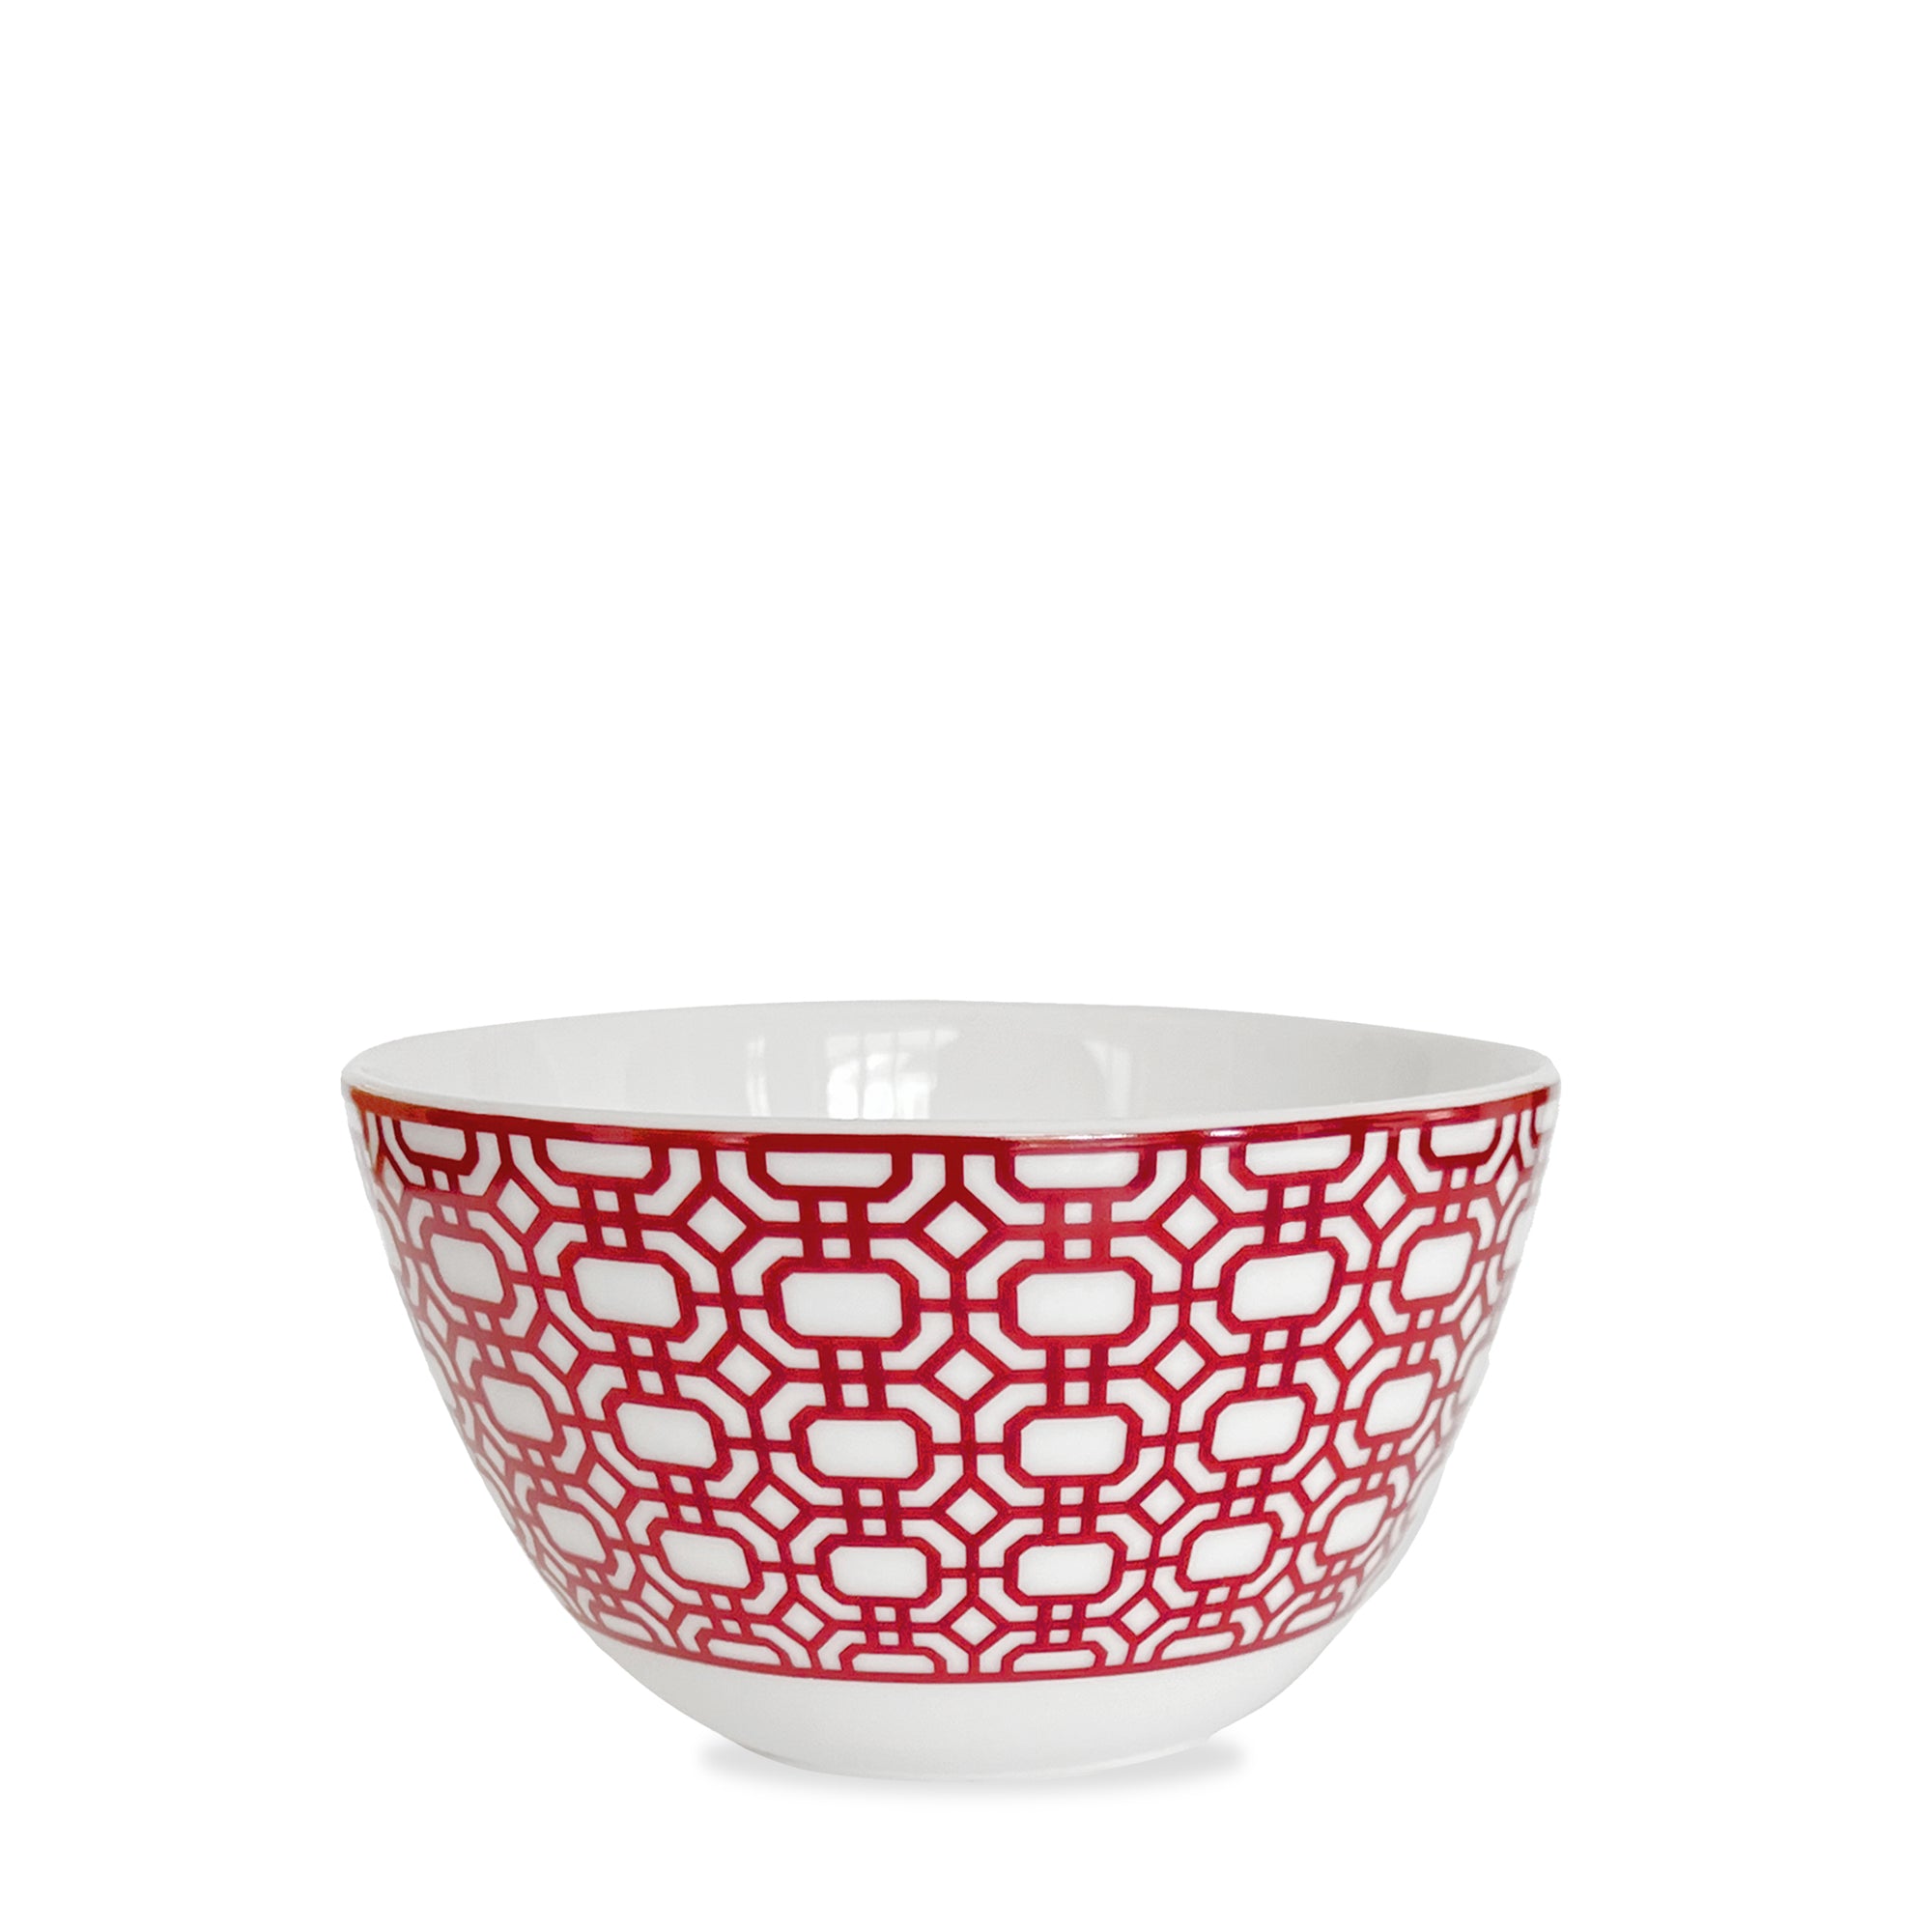 A Caskata Newport Crimson Cereal Bowl featuring a red geometric pattern on the exterior, inspired by the Newport Garden Gate design.